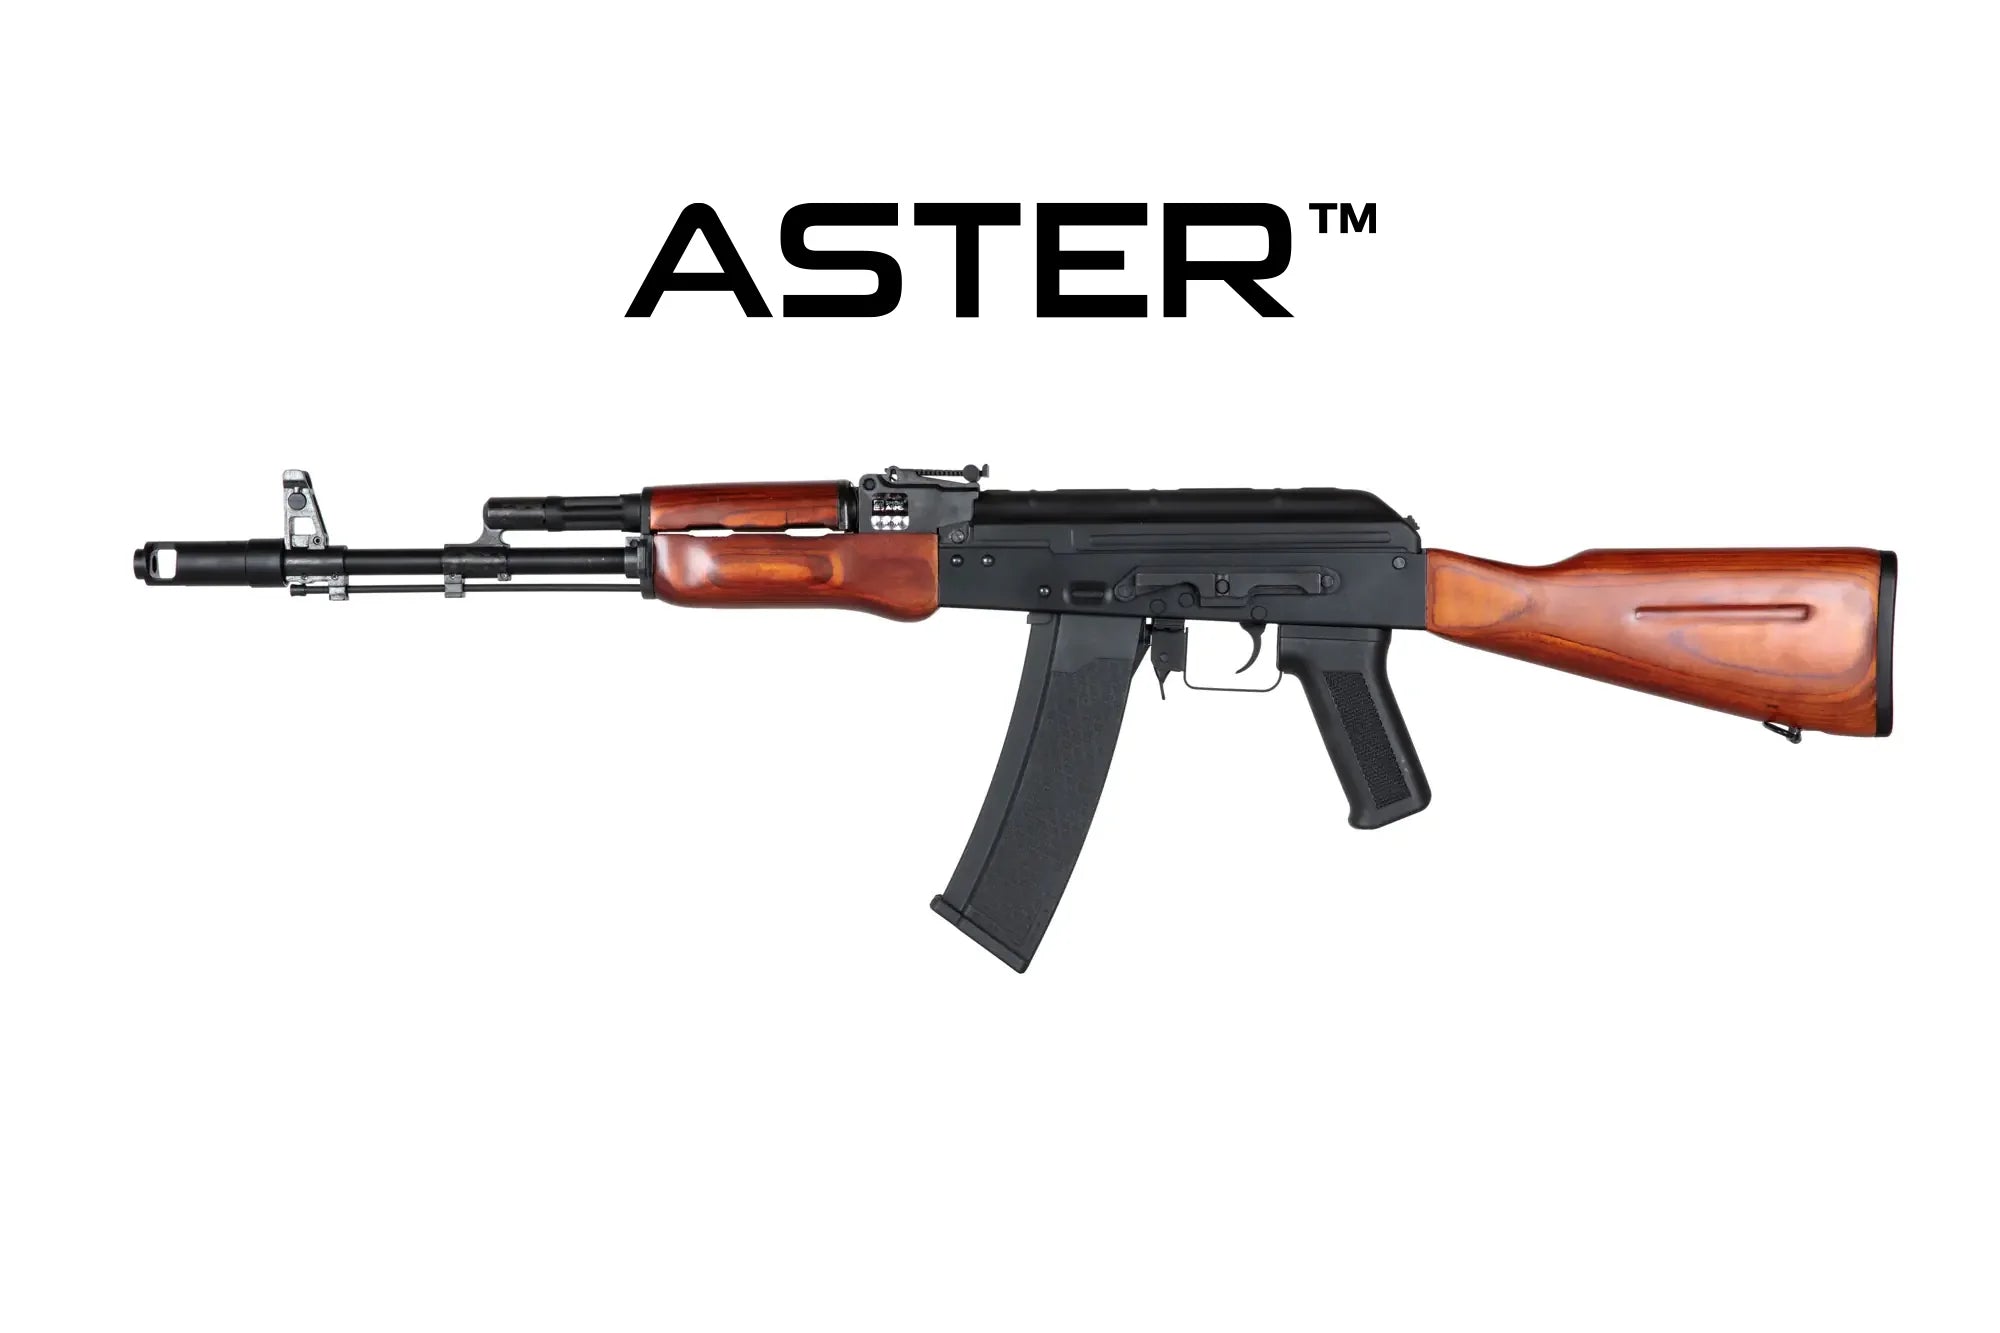 Specna Arms SA-J02 EDGE™ ASTER V3 - Eminent Paintball And Airsoft